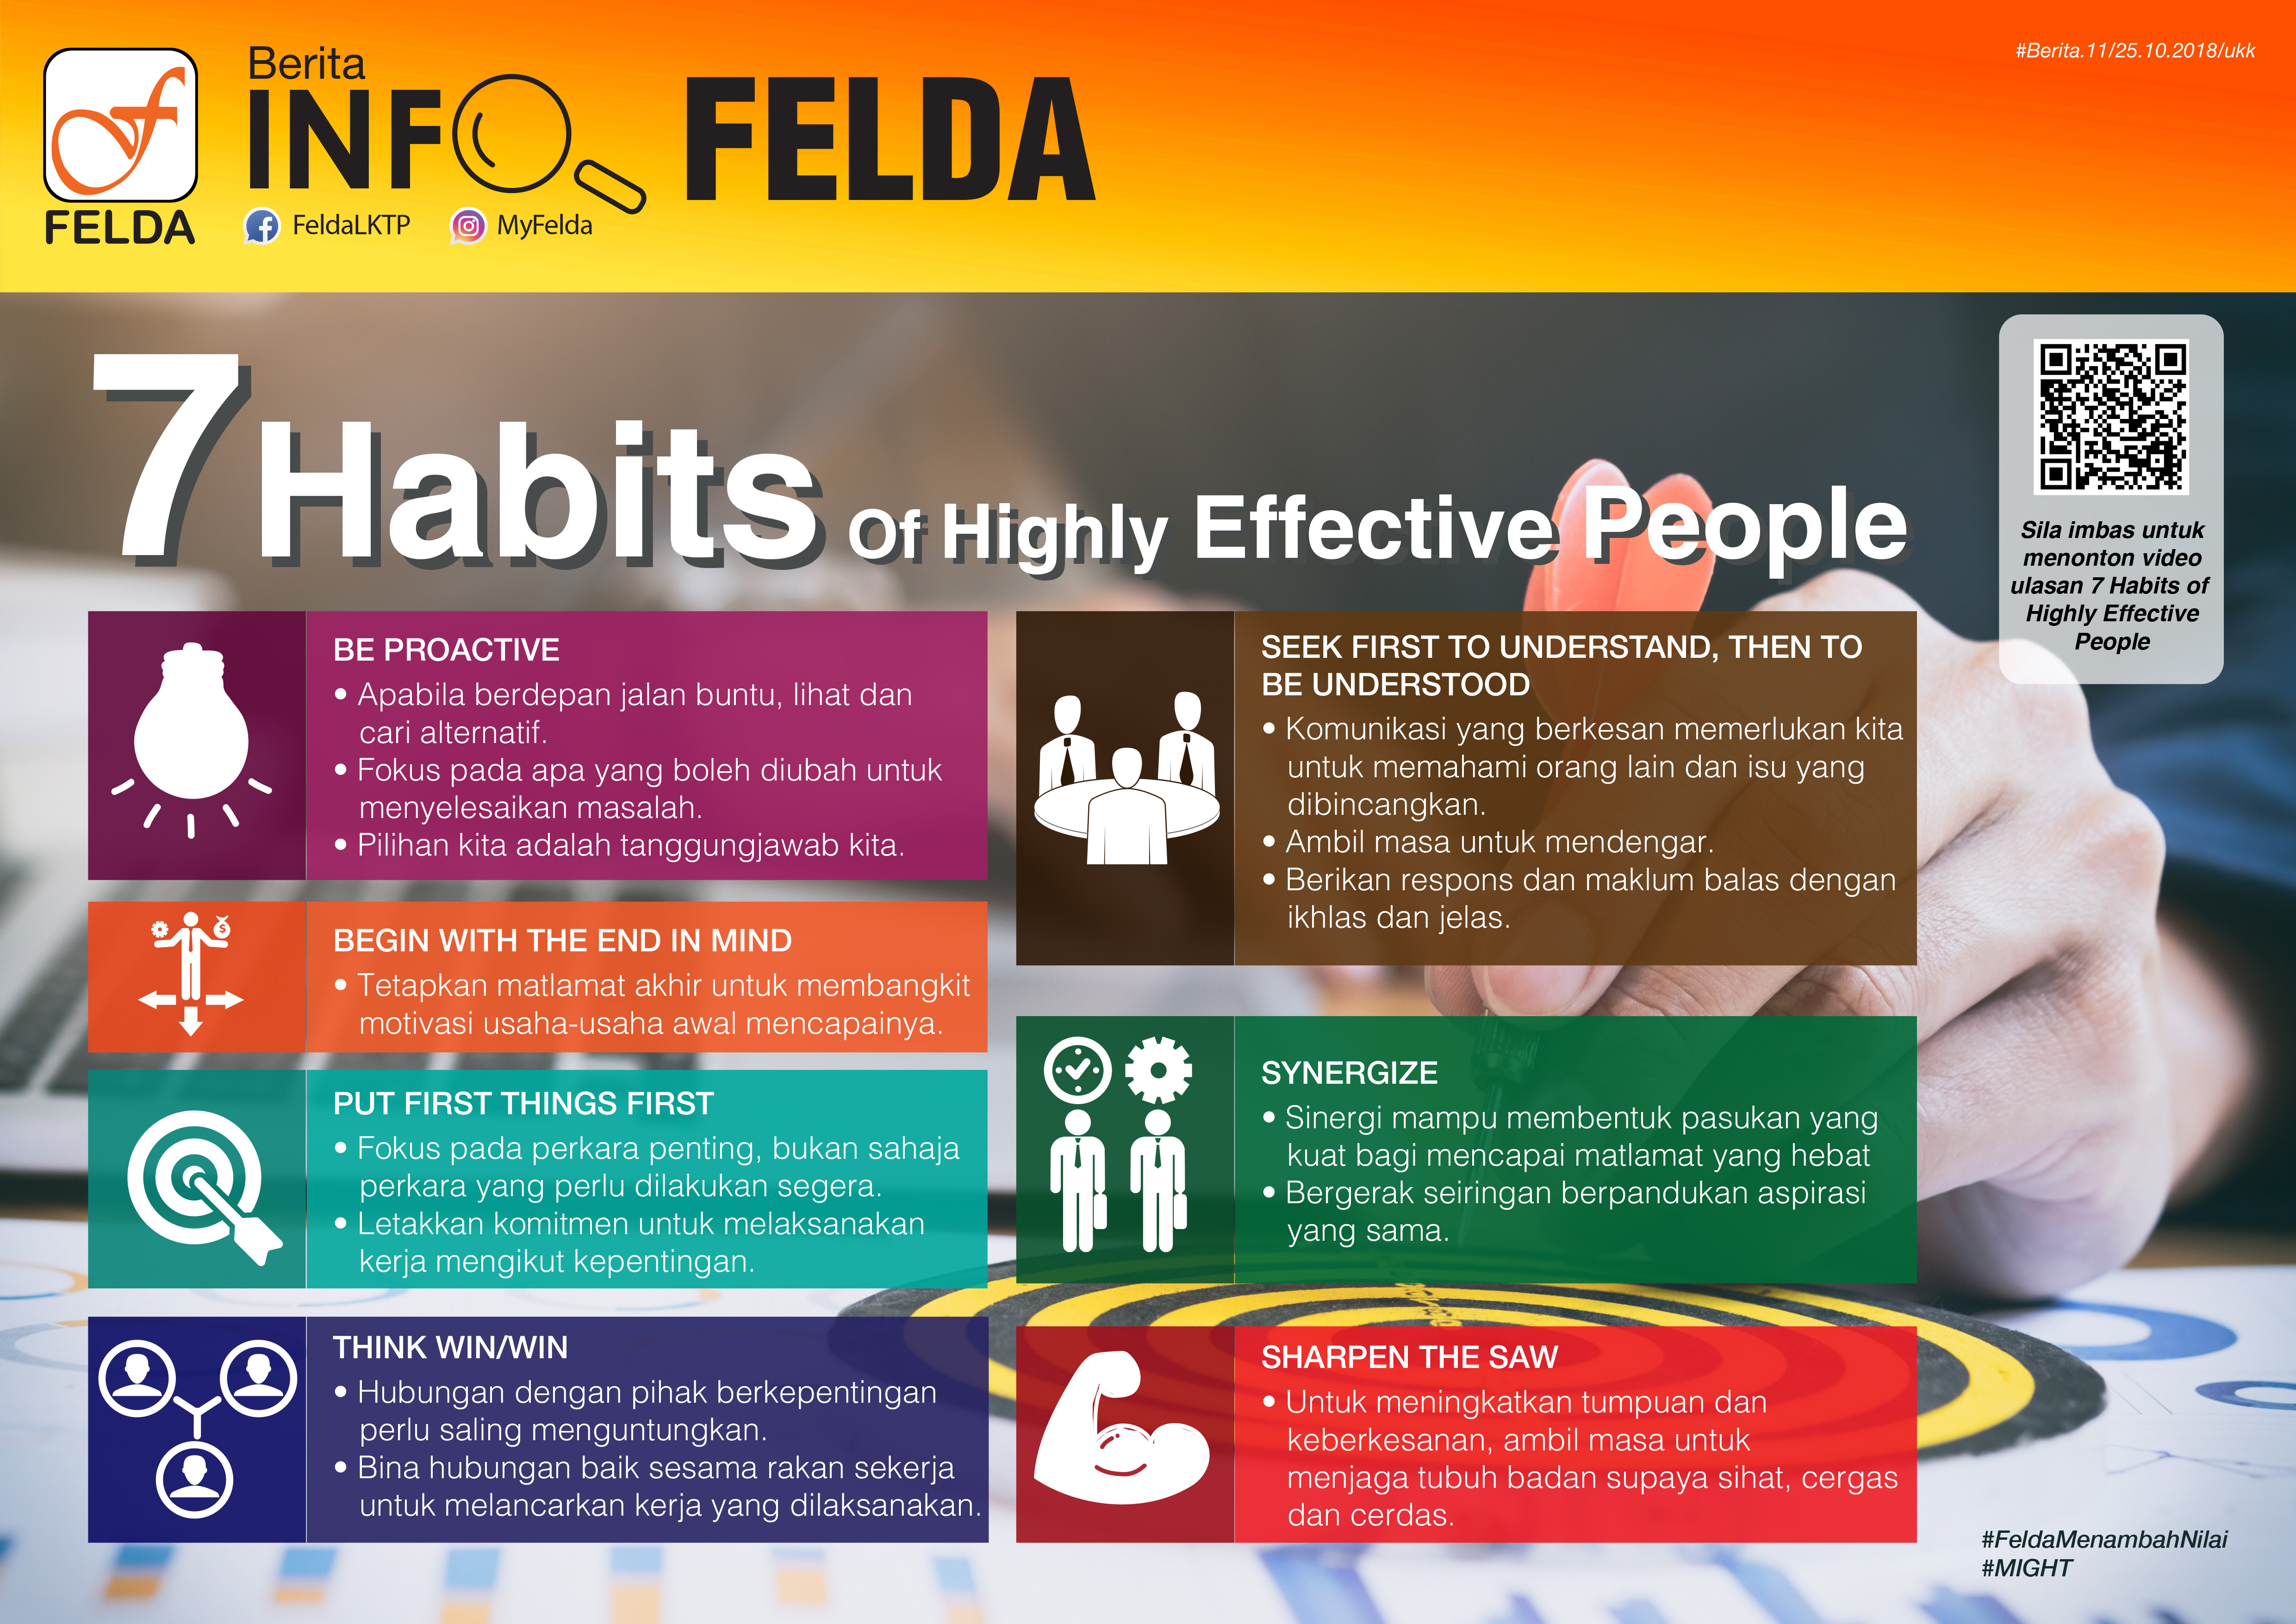 Habits of Highly Effective People